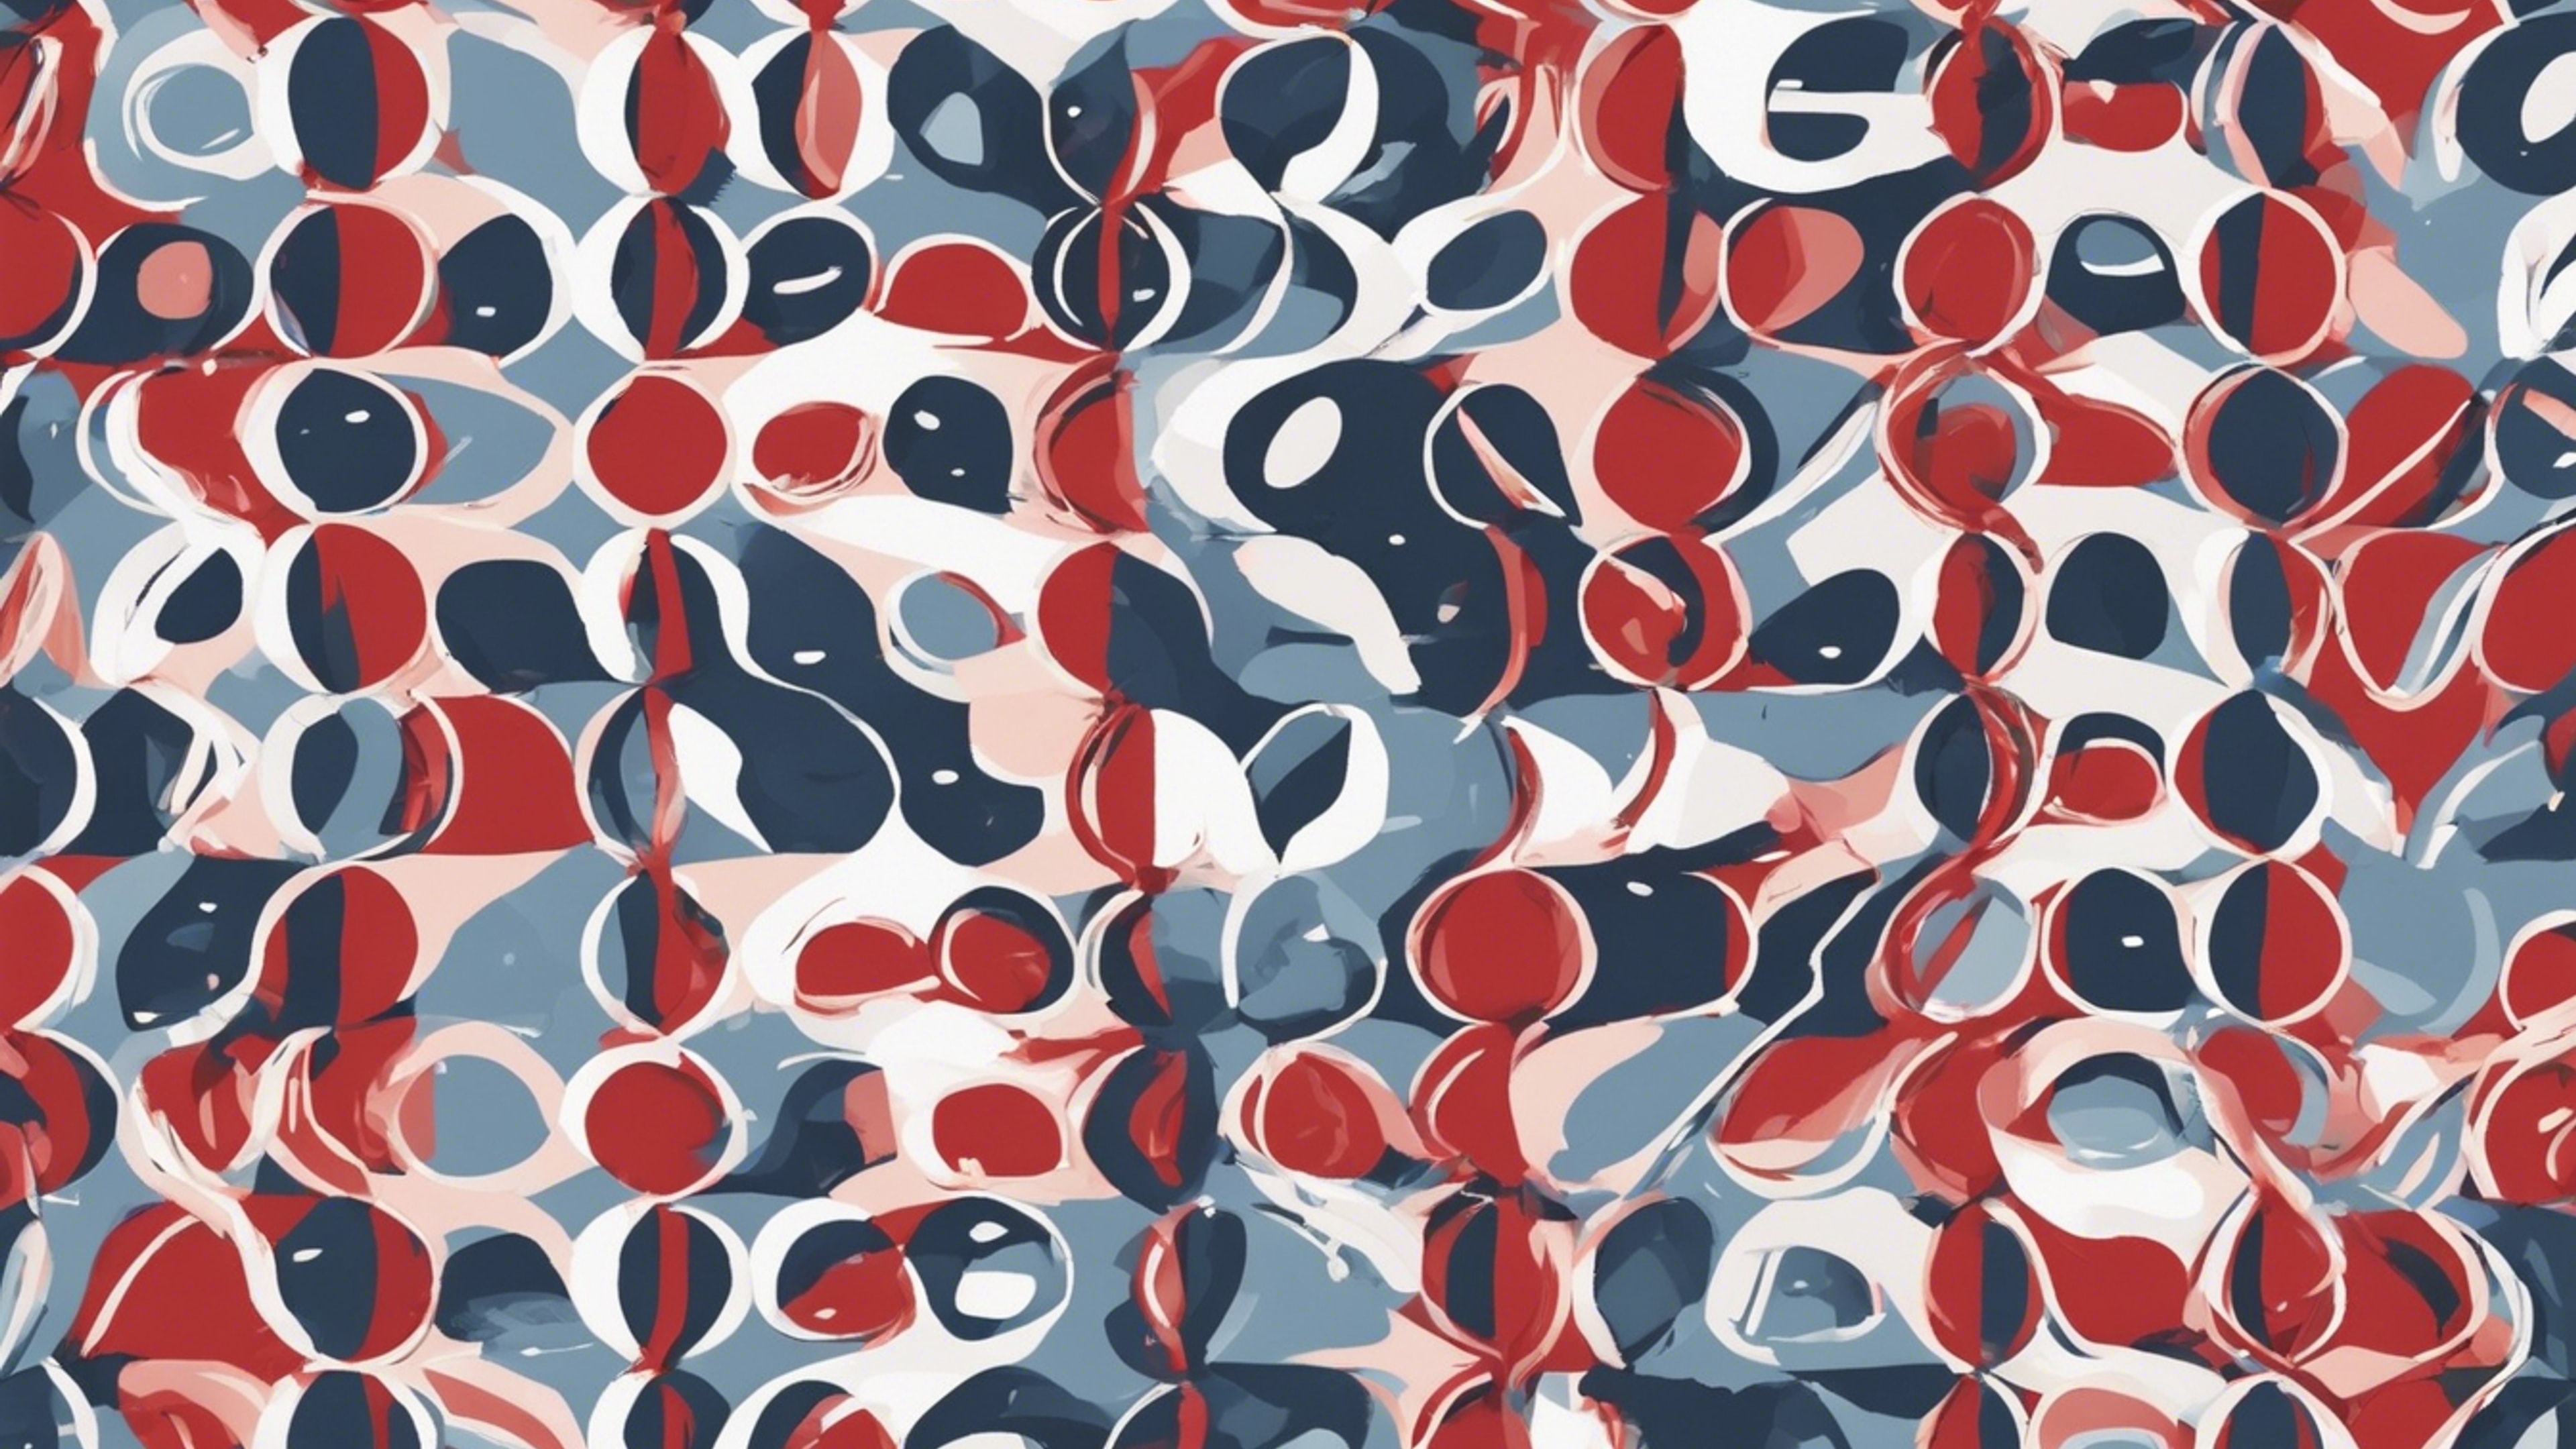 Simple and clean Scandinavian red and blue pattern. Wallpaper[367ad8fa403444a2bdd2]